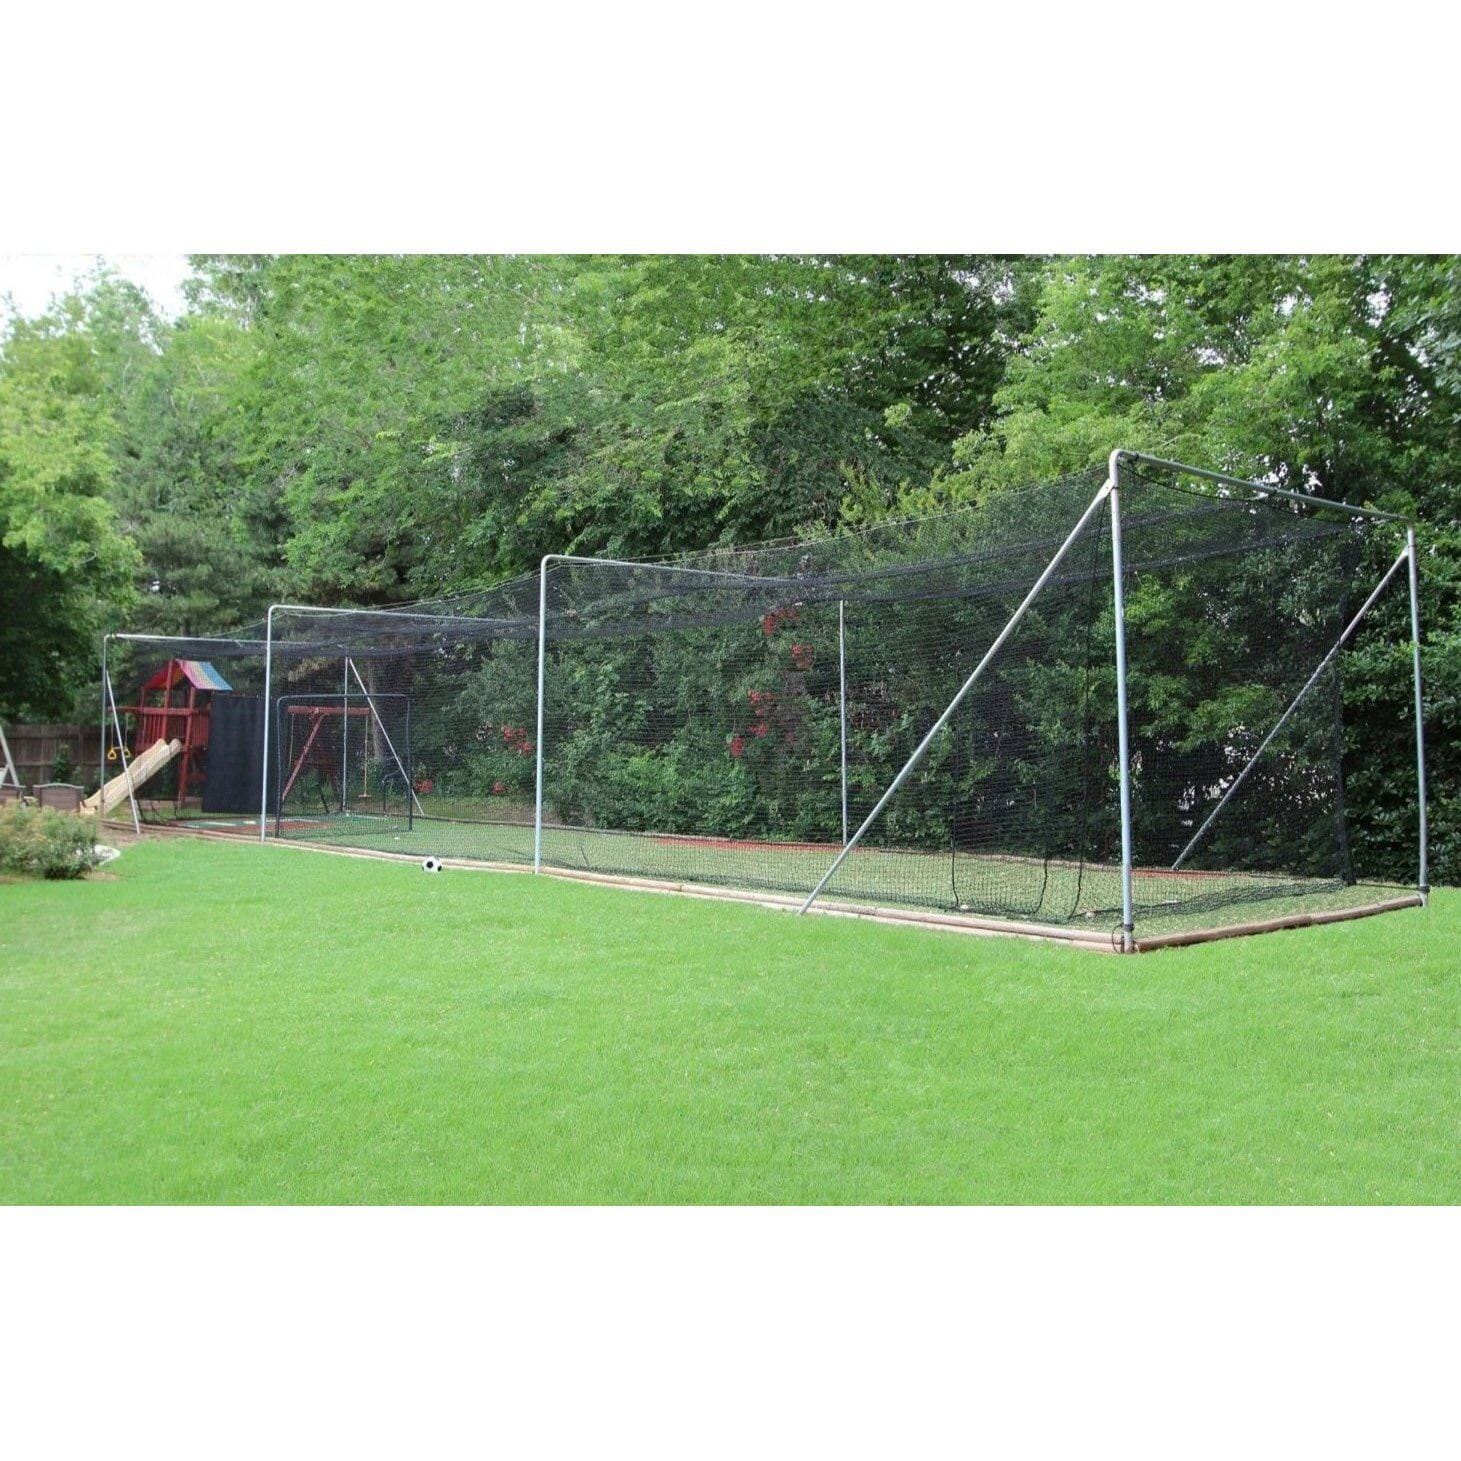 55' - 75' Deluxe Complete Commercial Batting Cage Frame